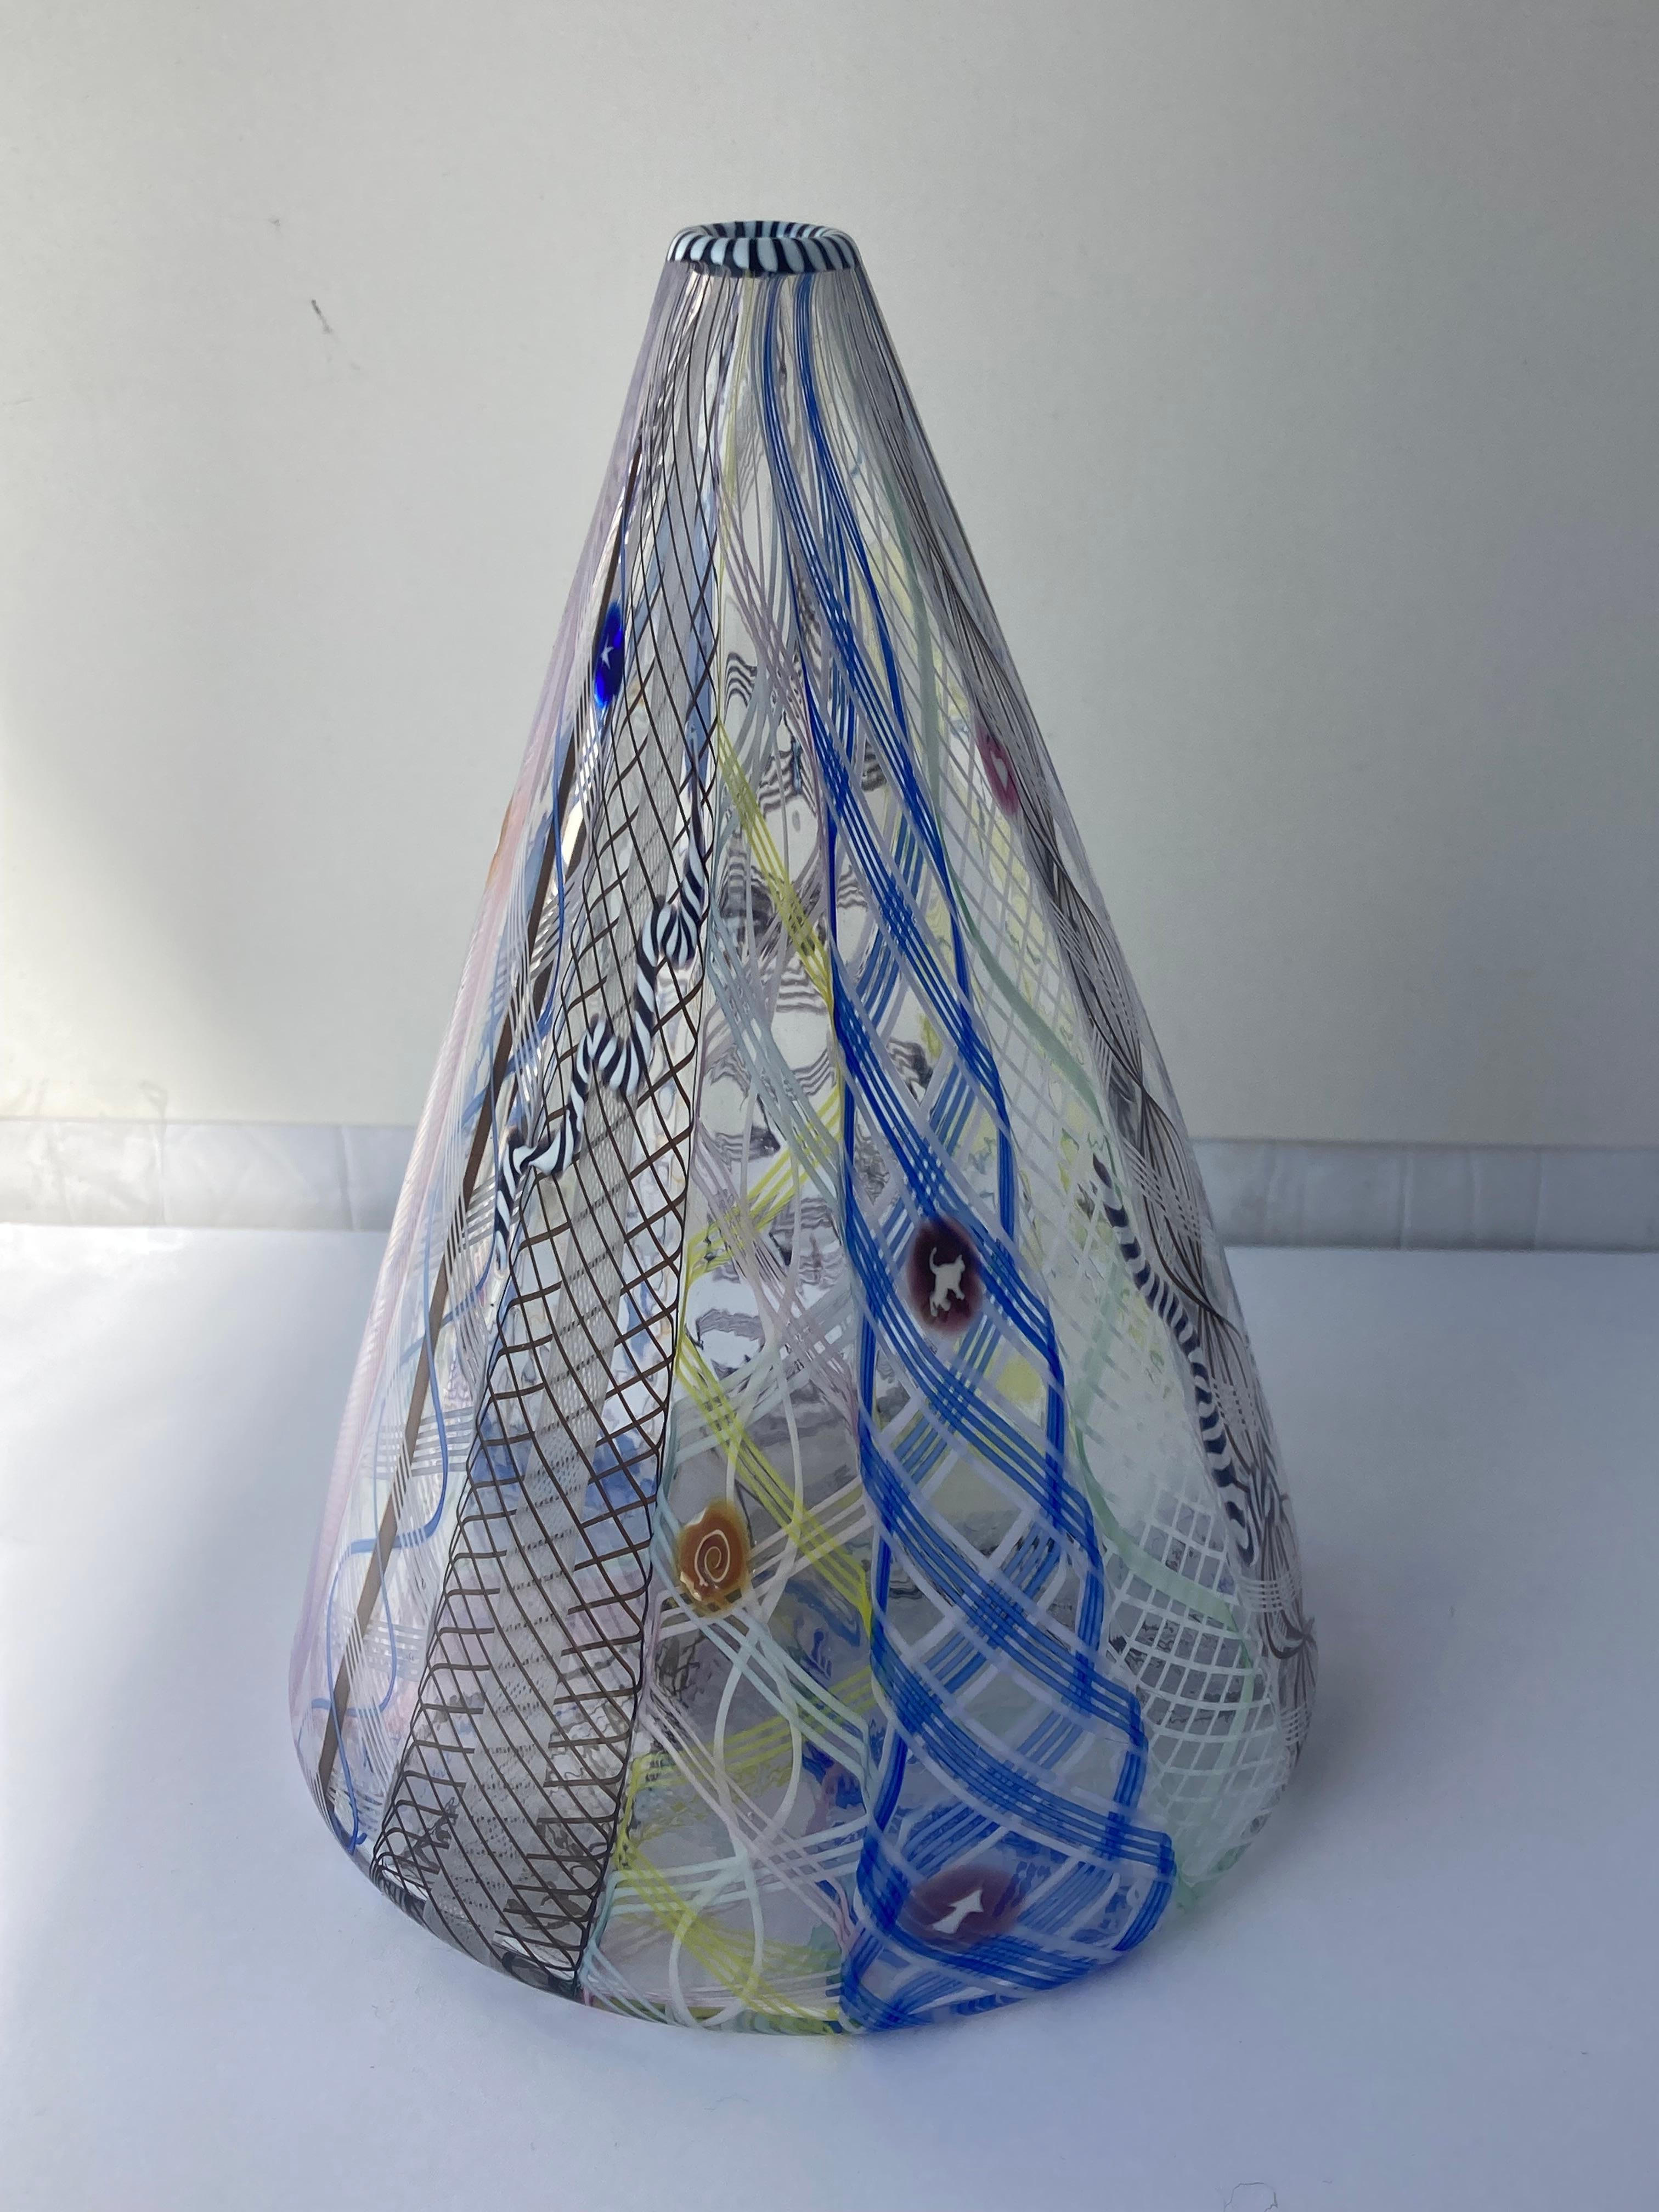 Hand-Crafted Richard Marquis Latticino Glass Cone Vase, by Noble Effort, Marked 1986 For Sale